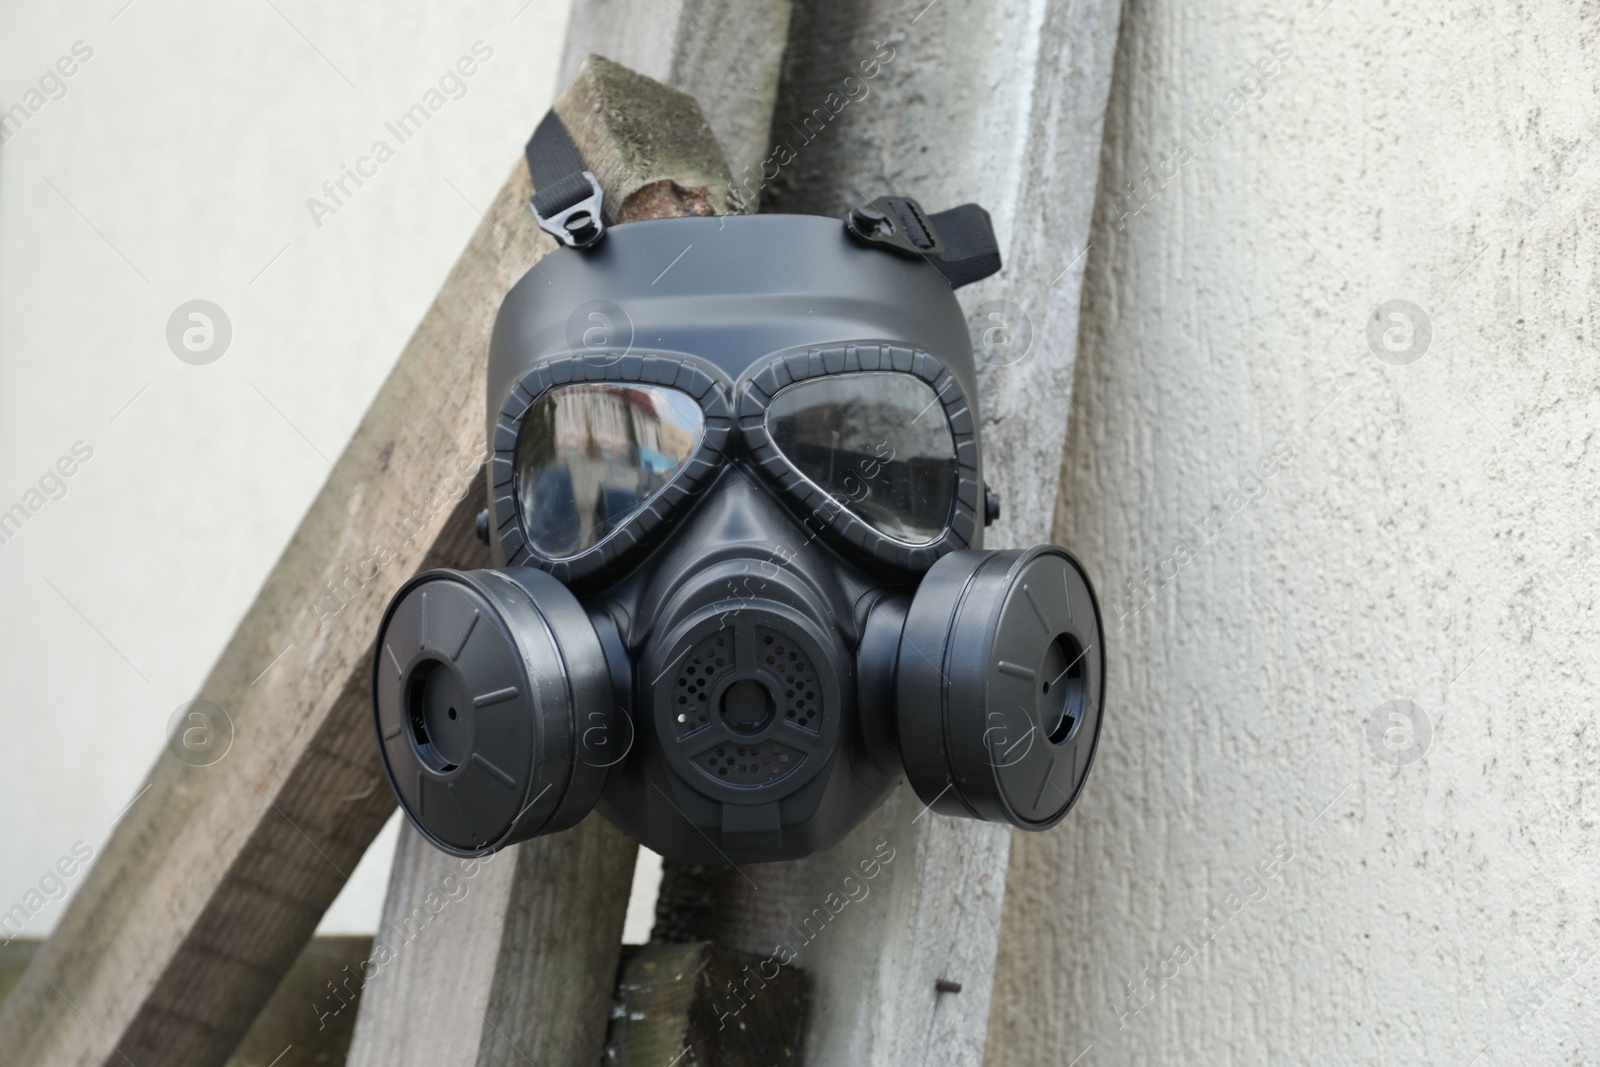 Photo of One gas mask hanging on building outdoors. Safety equipment